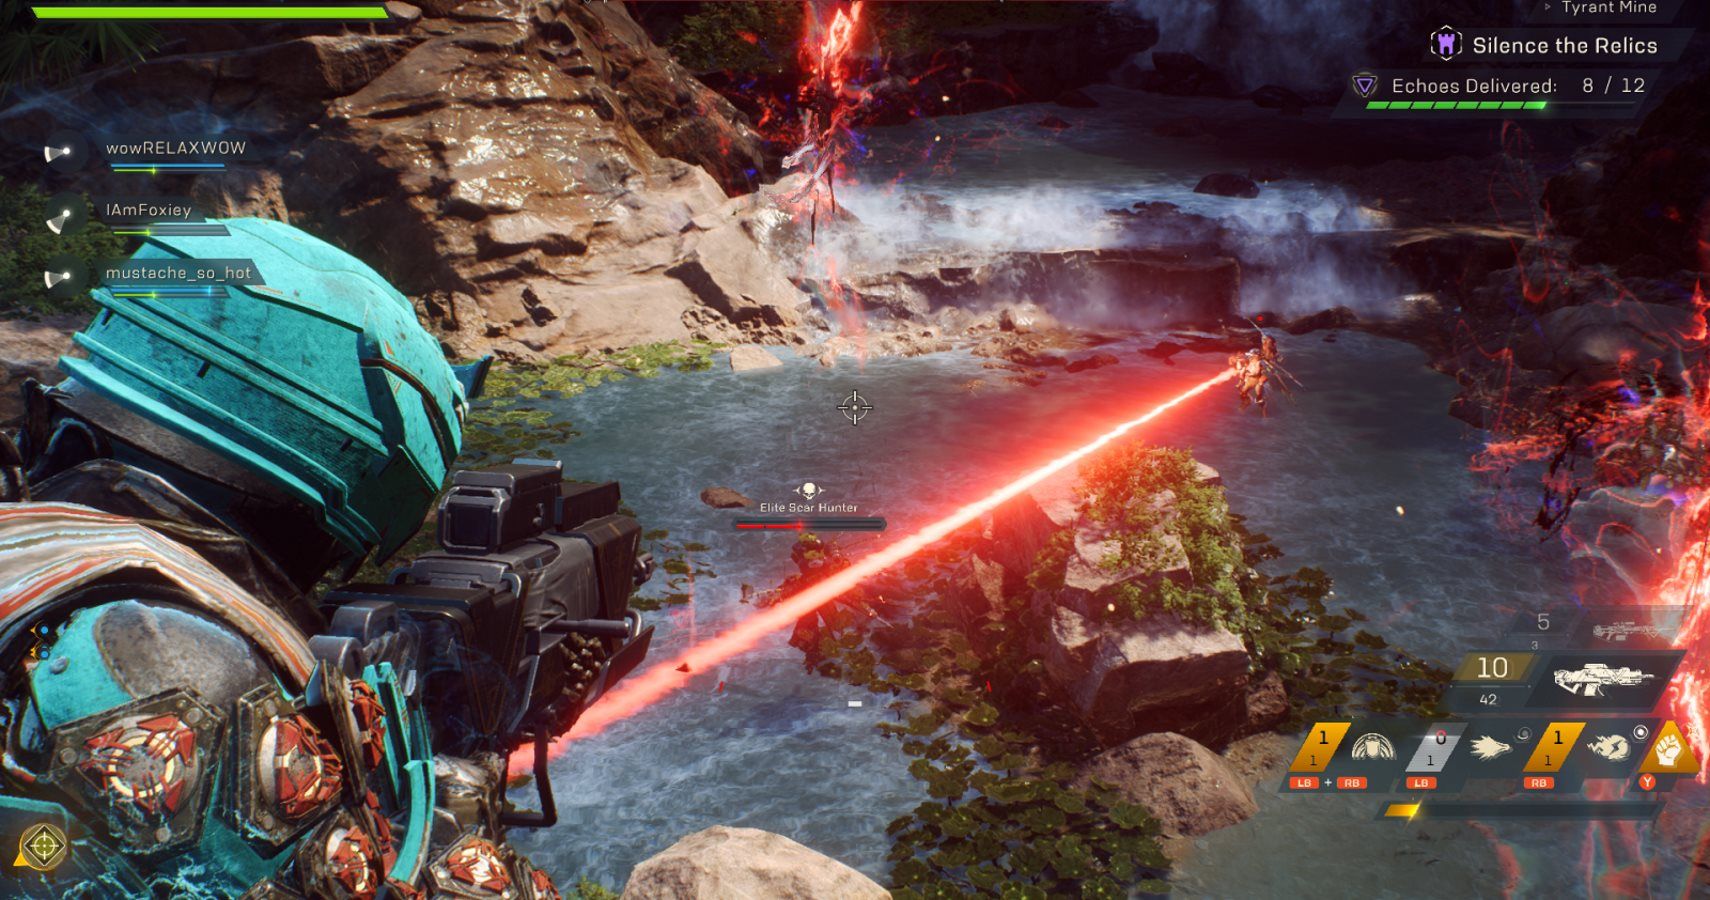 Anthem Players Are Boycotting The Game To Force Changes To Loot System